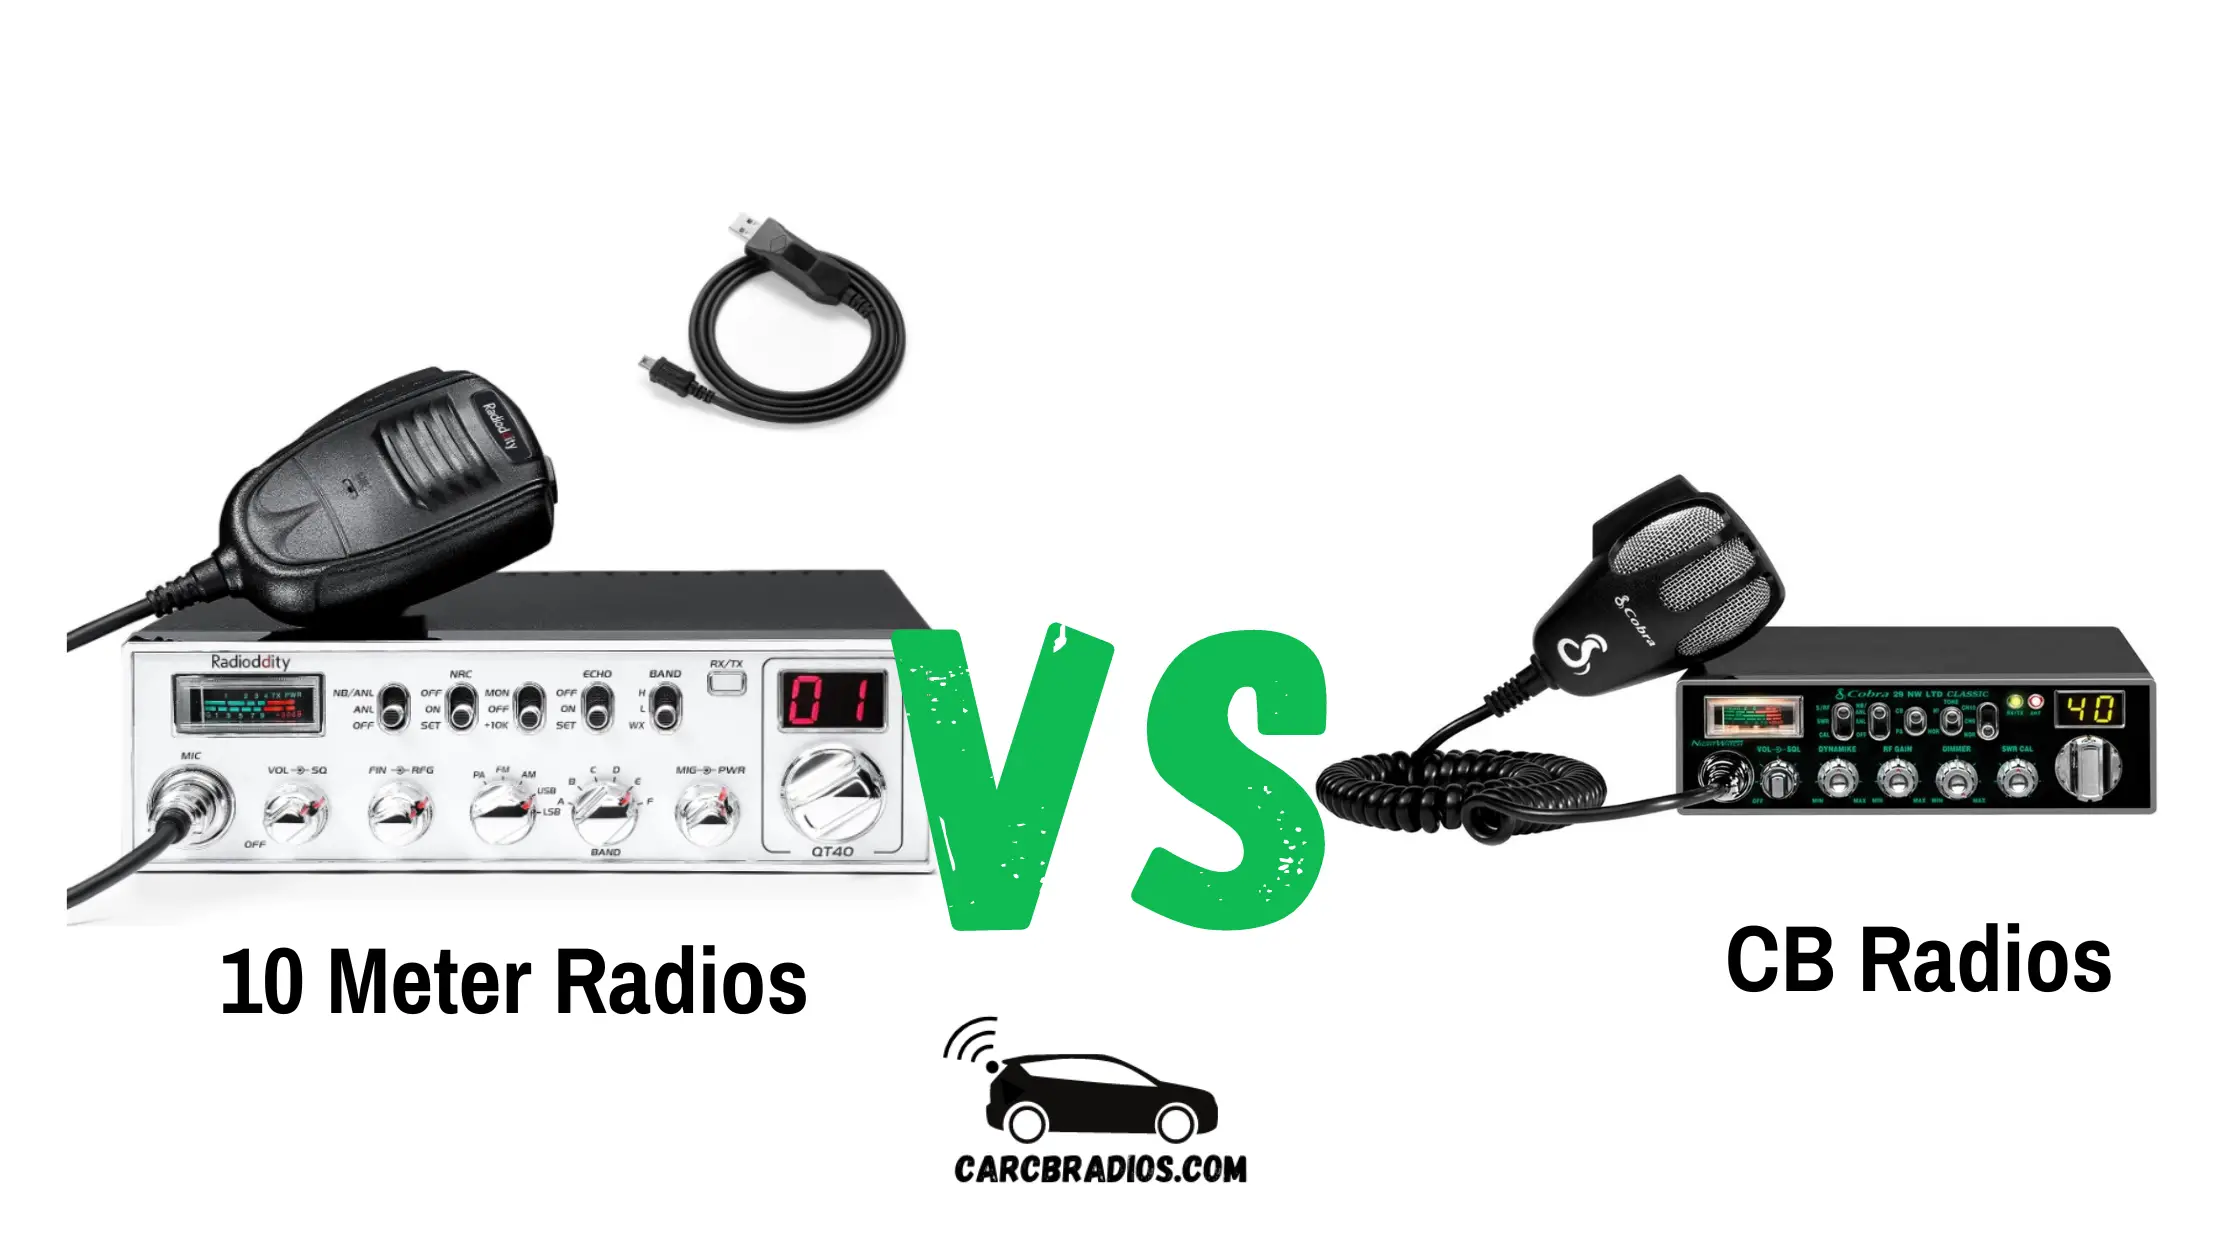 One of the biggest differences between the two radios is that CB radios do not require a license, while 10-meter radios require an FCC license. Additionally, CB radios are limited to a range of up to seven miles, while 10-meter radios can transmit signals over much longer distances. In this article, I will provide more background information on CB radios and 10-meter radios, including their range, power, and frequencies, as well as some common uses and popular brands.